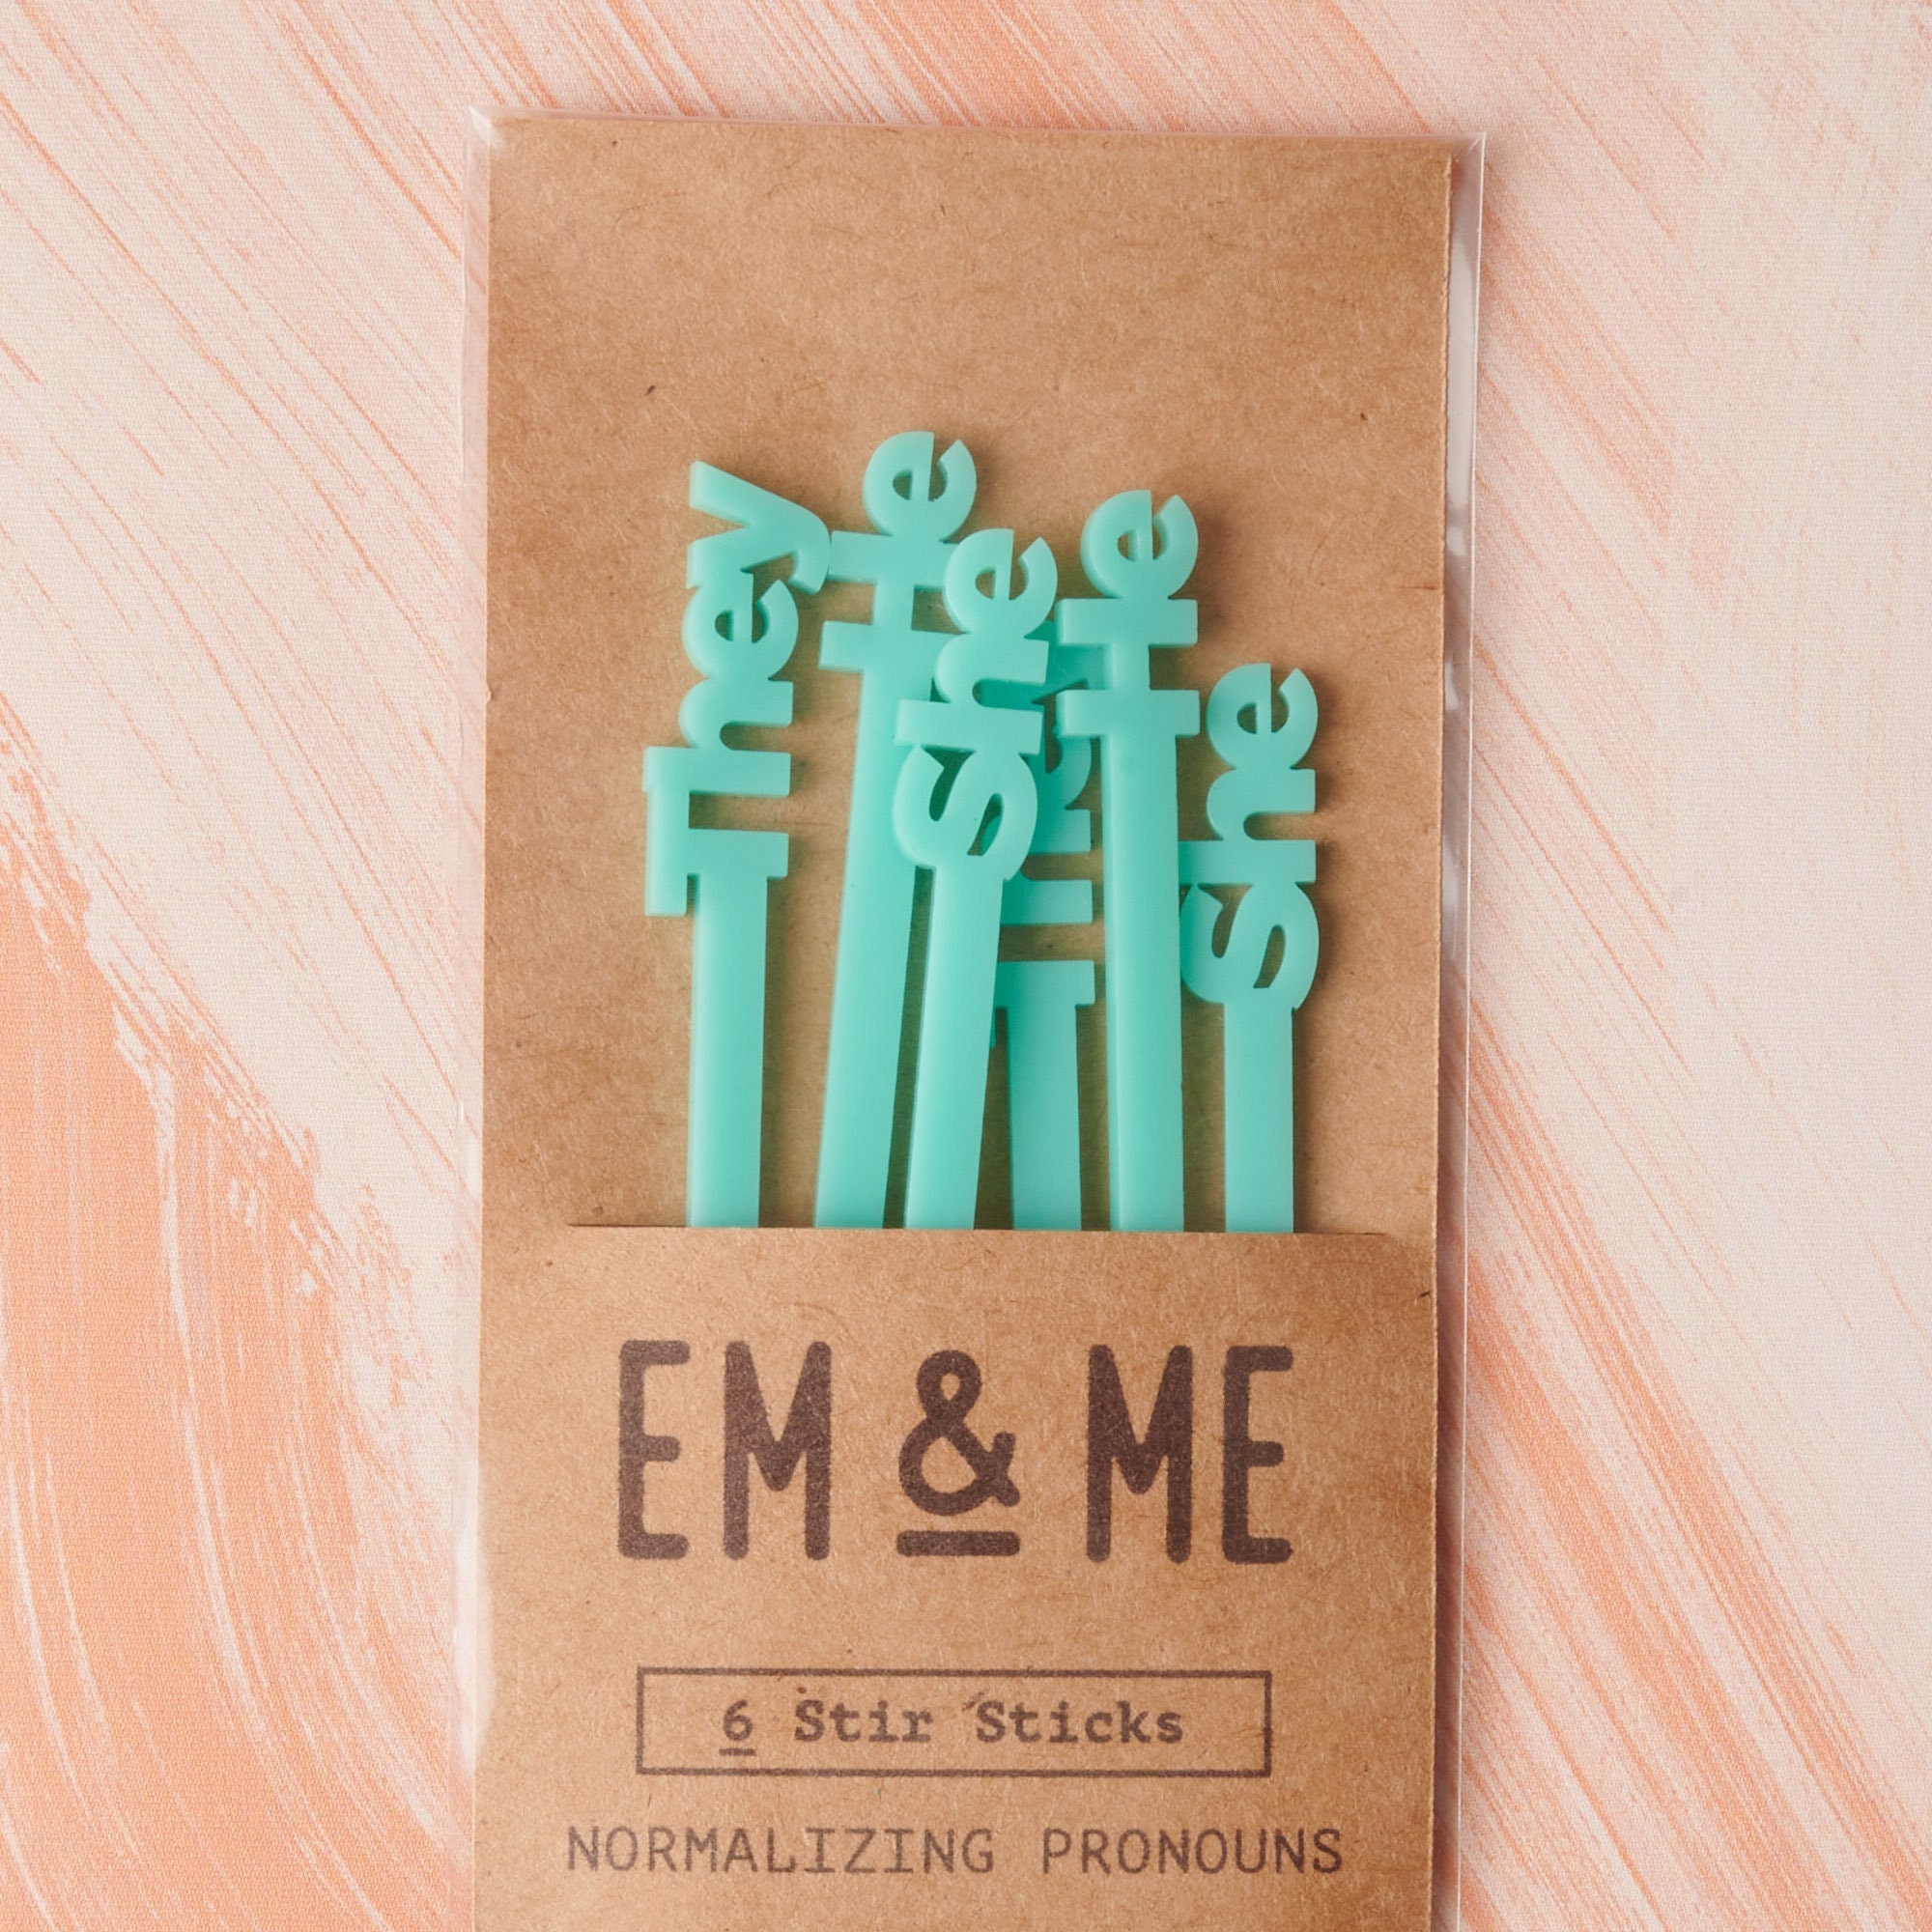 EAMS* He, She, They. White Drink Stirrers